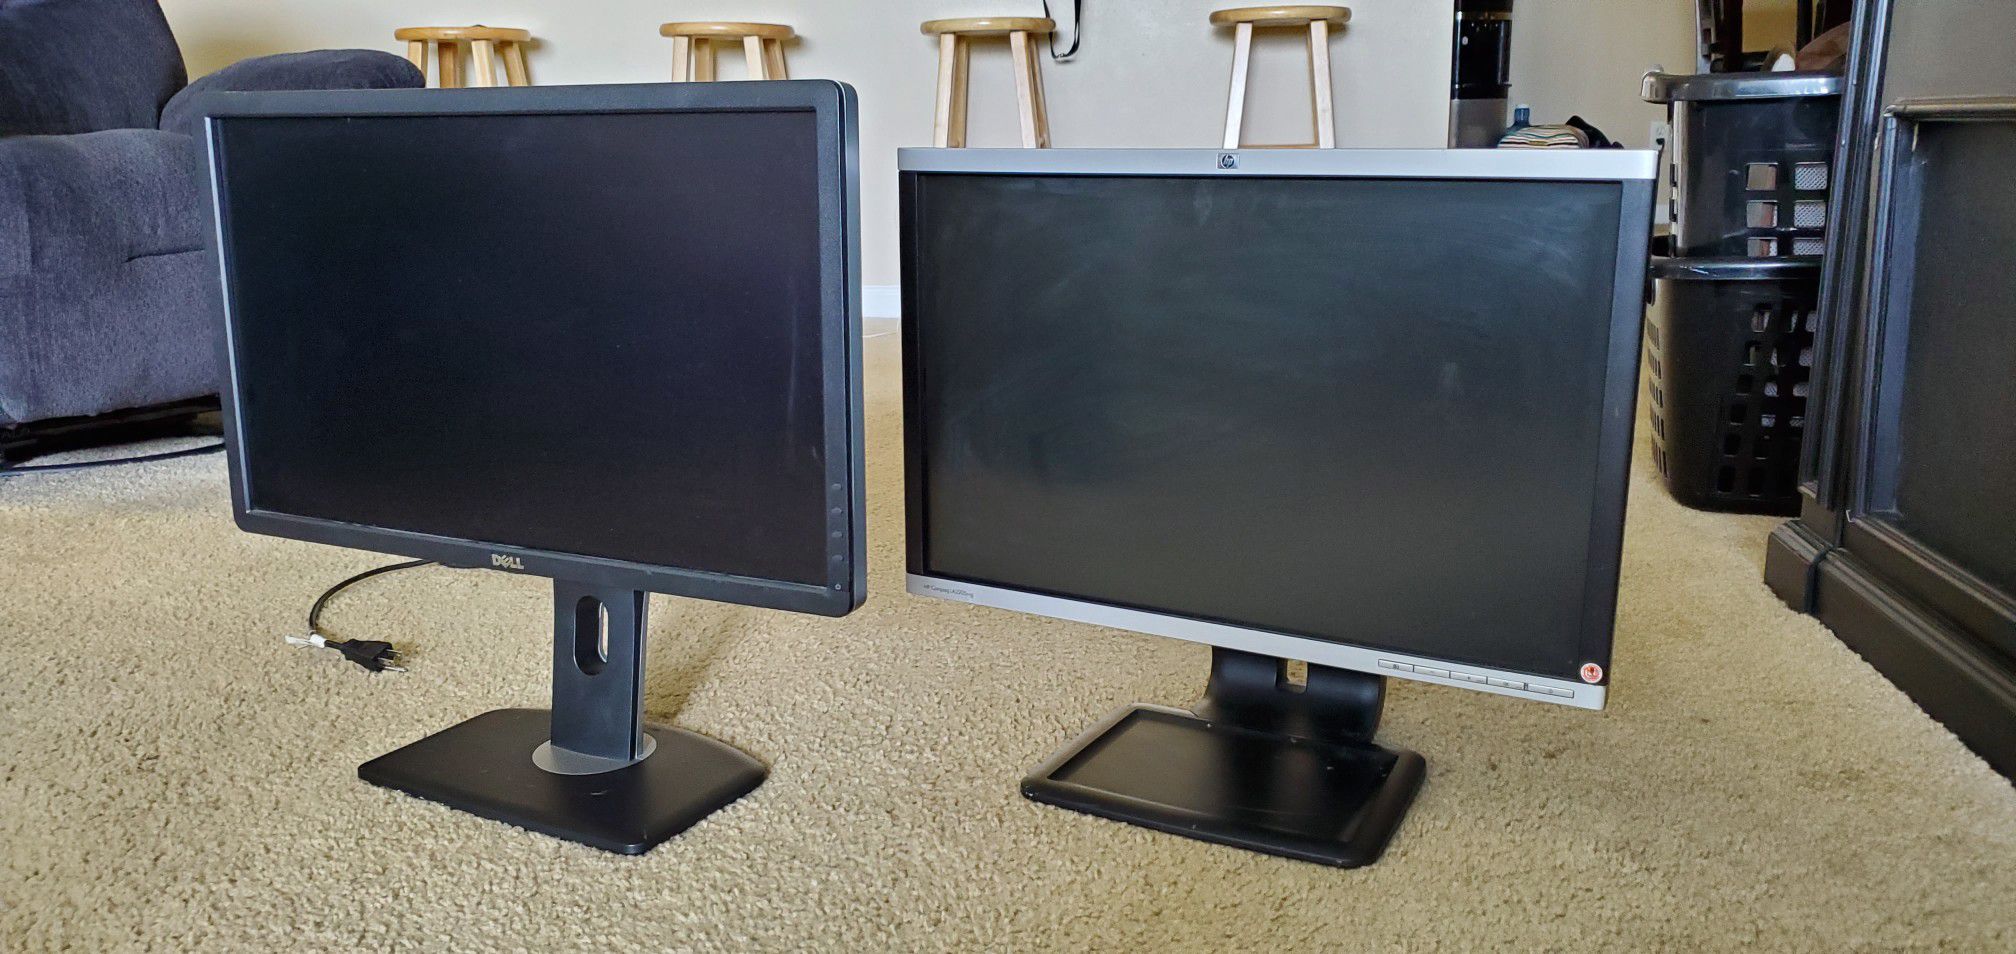 24 inch Dell and 22 inch HP flat screen Monitors